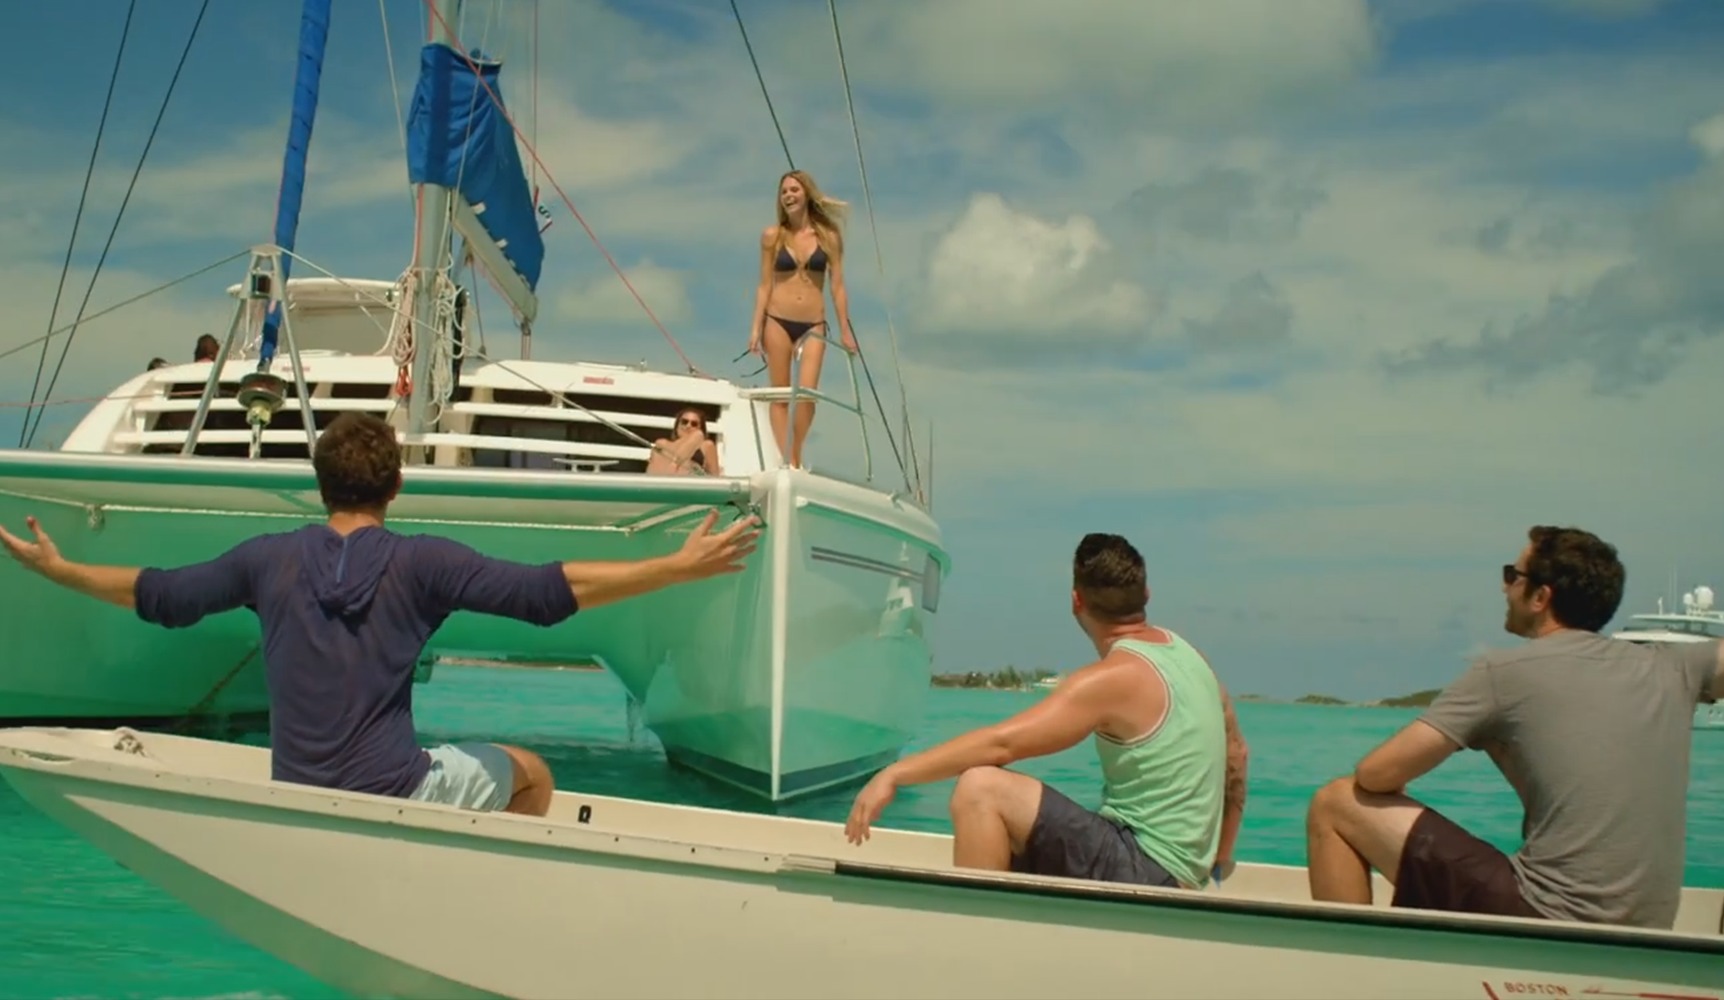 Music Video - Brett Eldredge, Beat of the Music - Katie Luddy on a sail boat